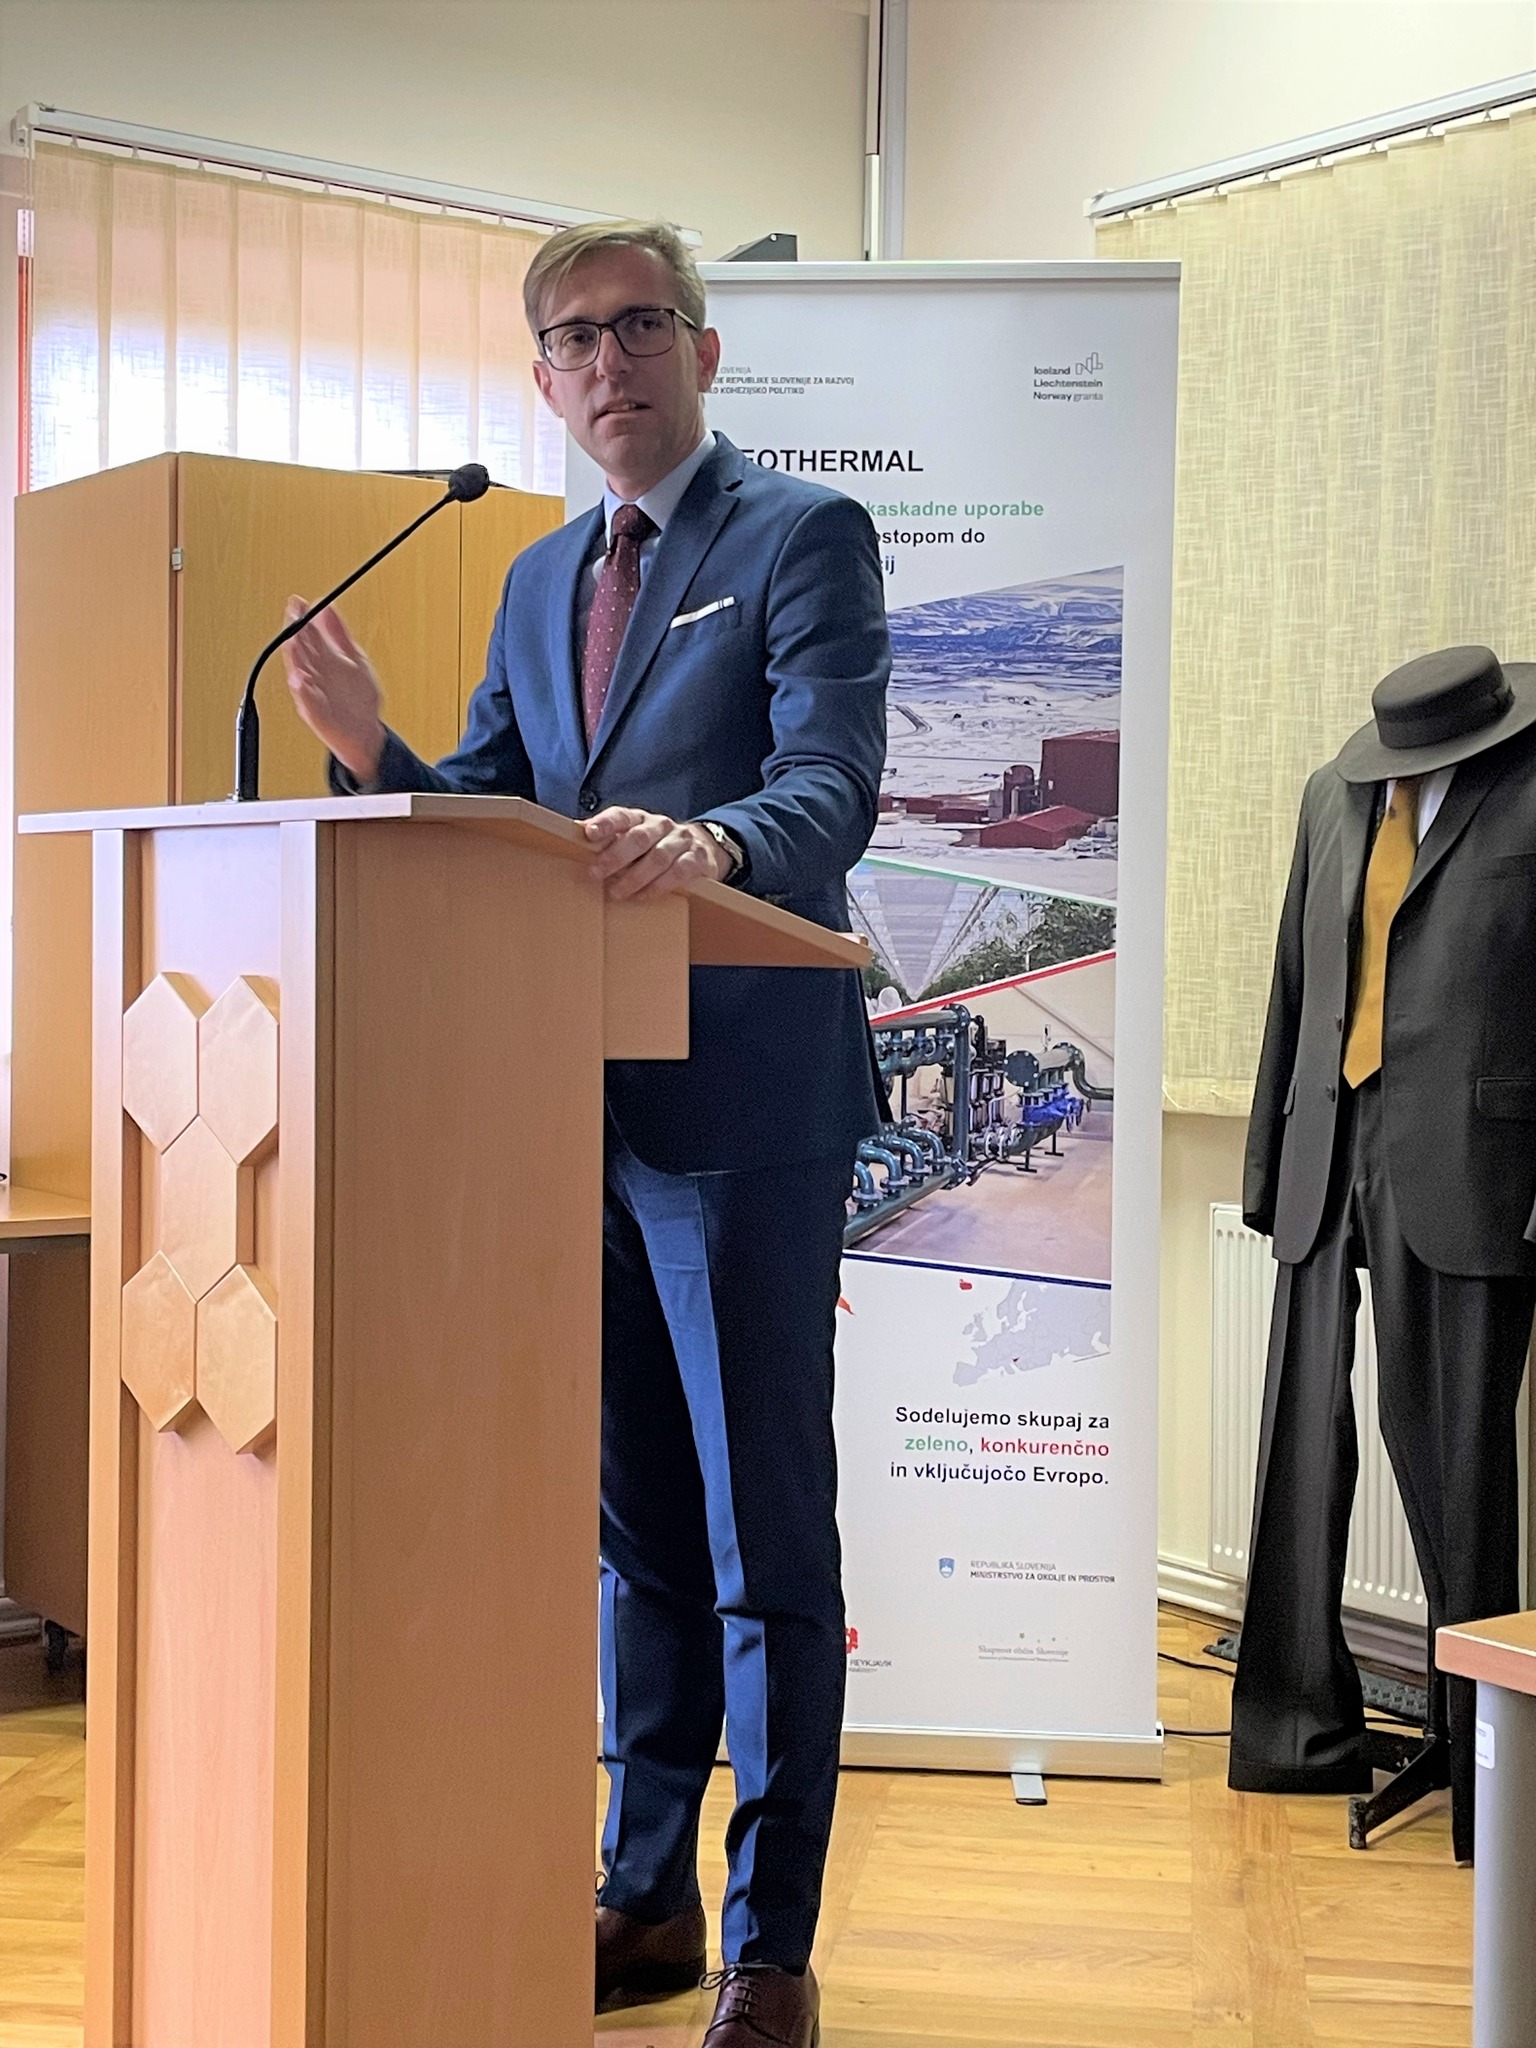 State Secretary at the Ministry of Cohesion and Regional Development, mag. Marko Koprivc, standing behind a microphone during the opening speech.